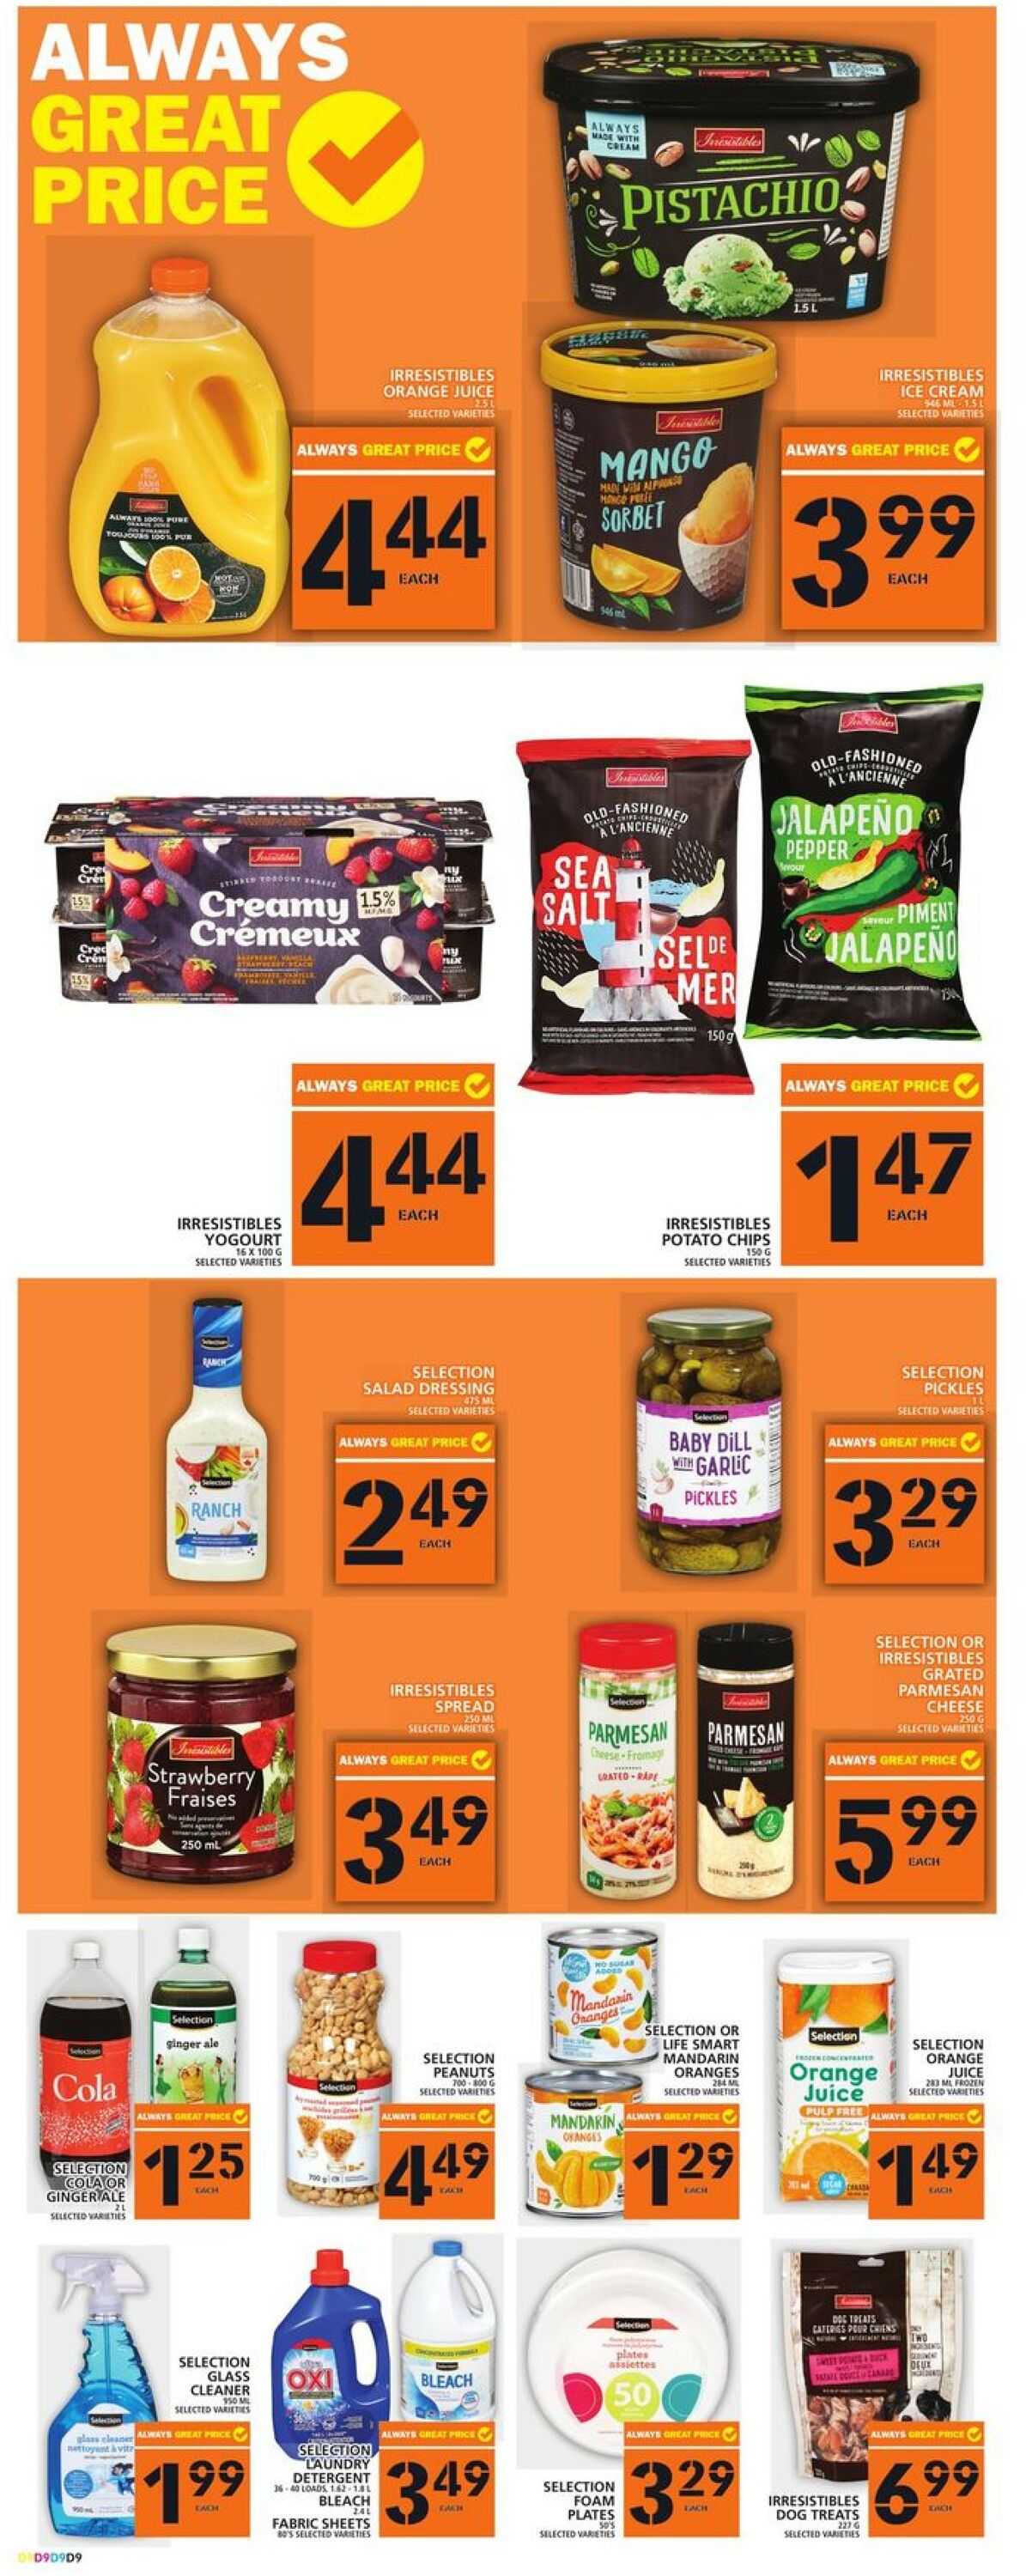 Food Basics Flyer from 10/20/2022